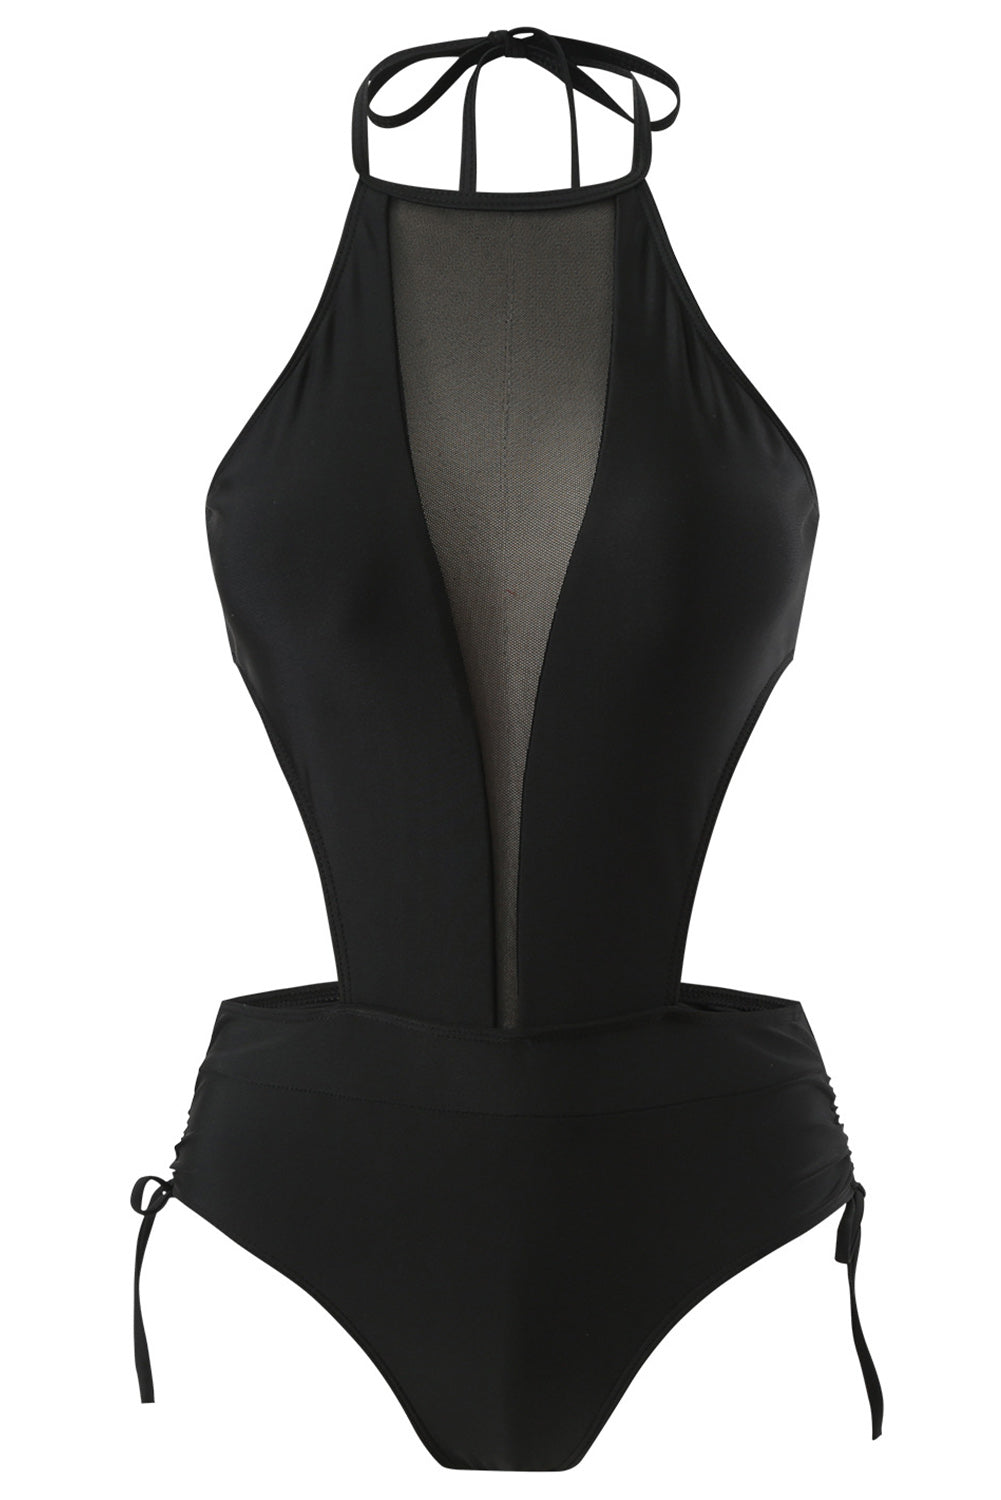 Black Knotted Halter Backless One Piece Swimsuit